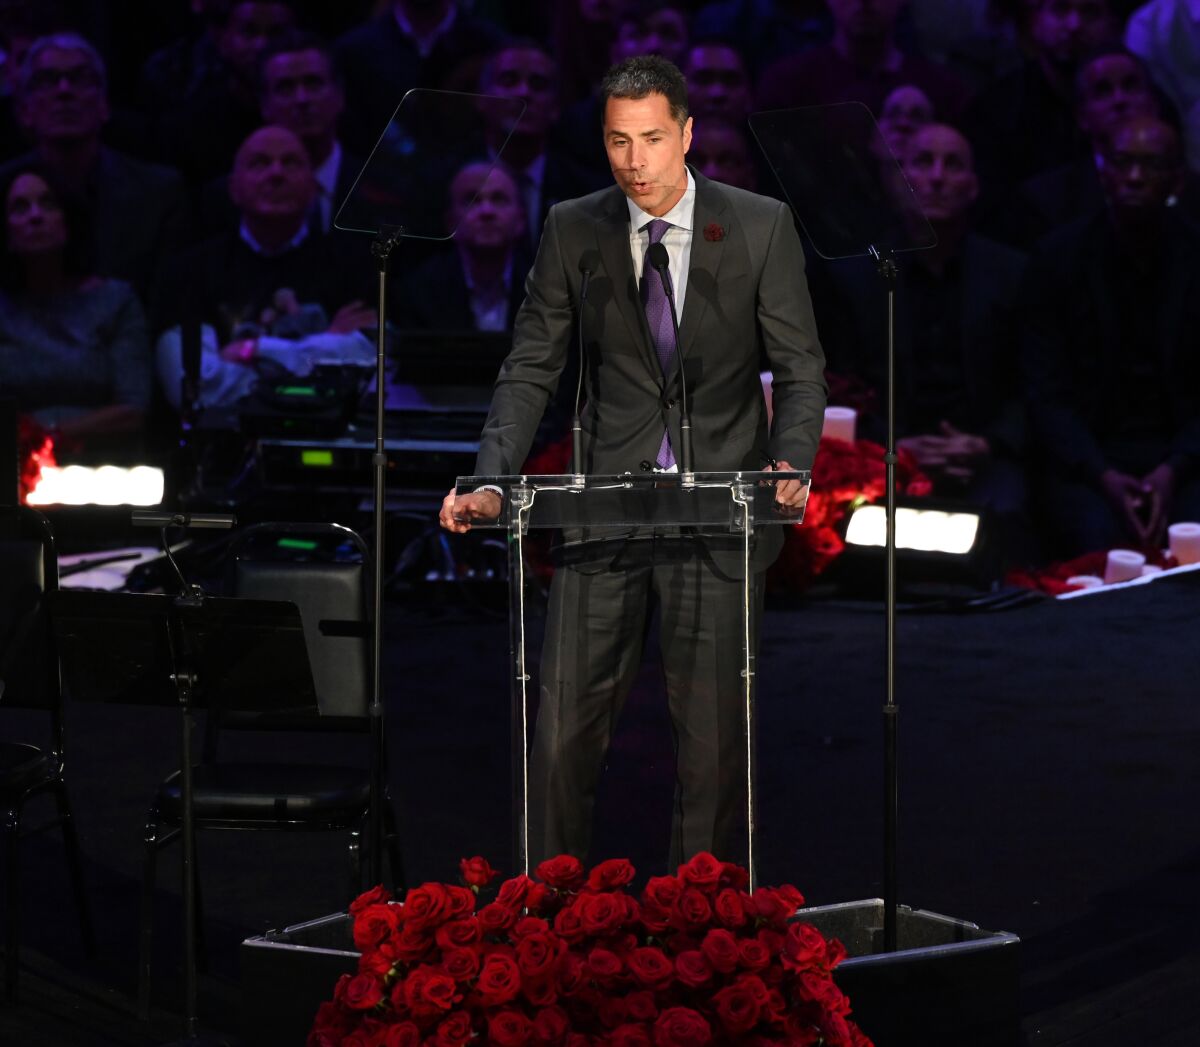 Rob Pelinka takes his turn to talk about Kobe and Gianna Bryant at the "Celebration of Life" at Staples Center.